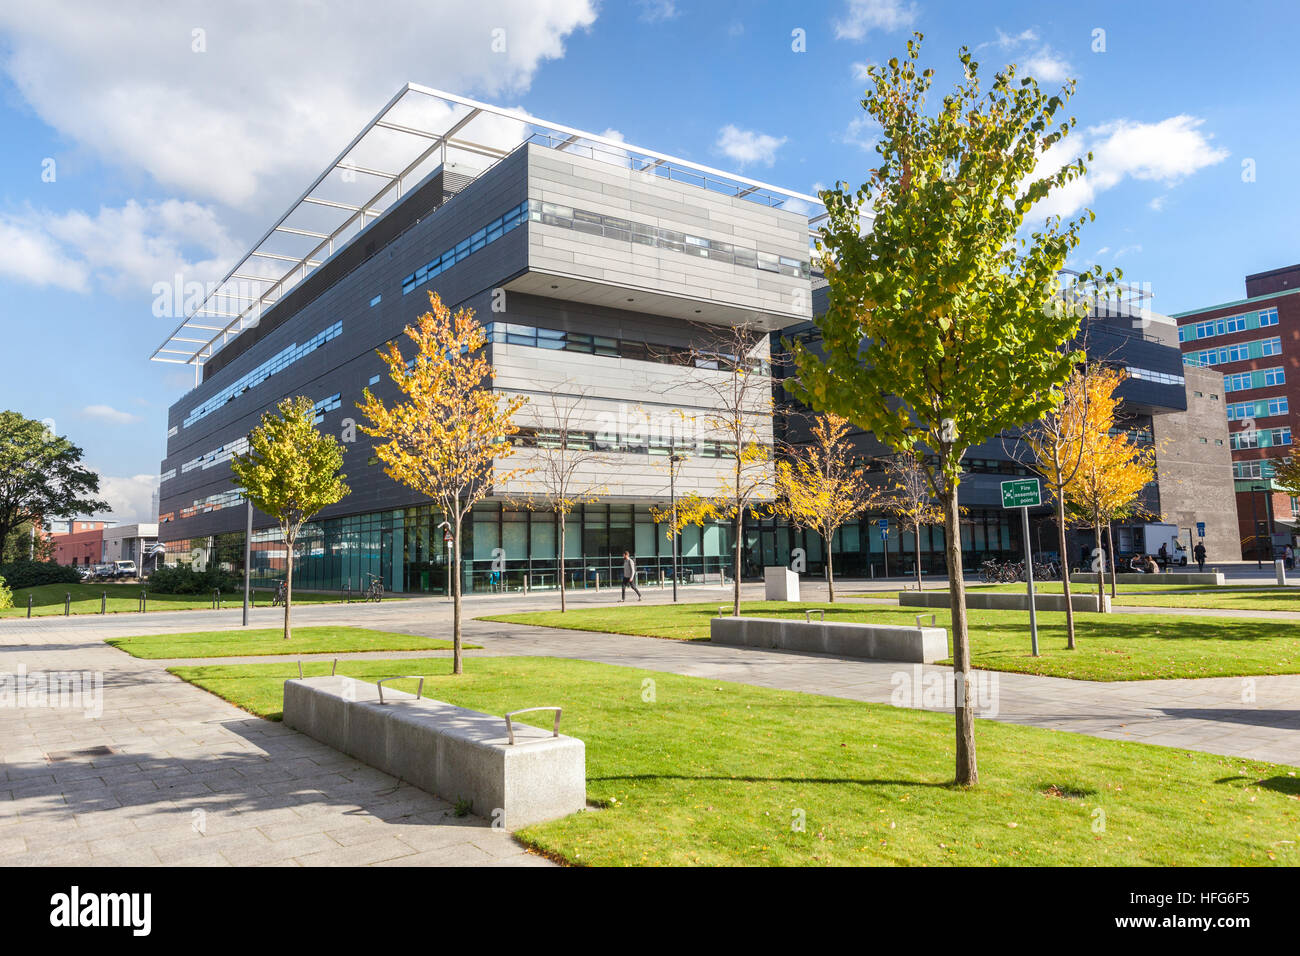 Alan Turing building in autumn, The University of Manchester, UK Stock Photo